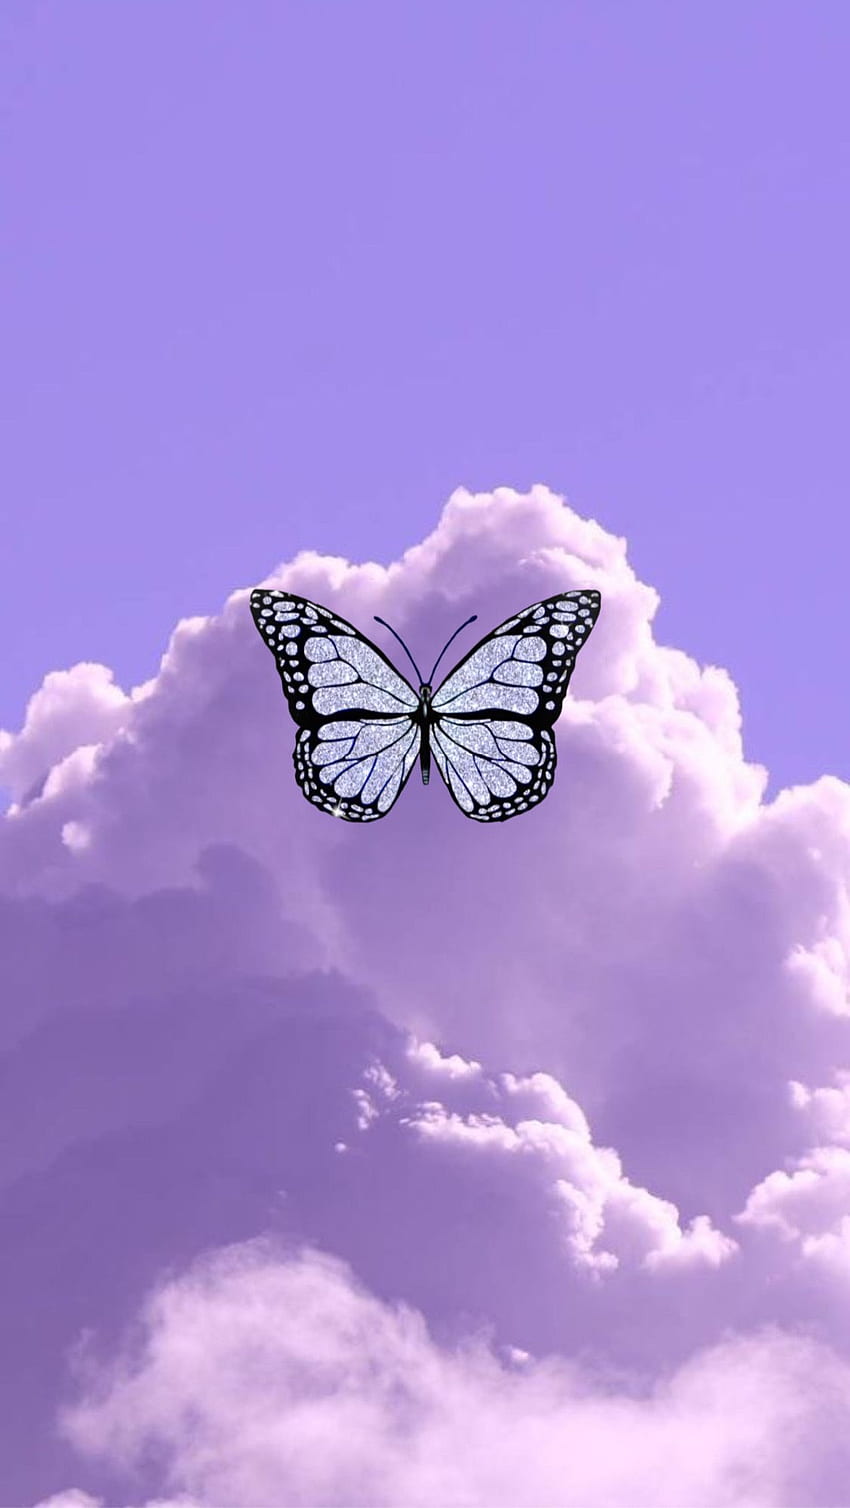 500 Black And Purple Butterflies Wallpapers  Background Beautiful Best  Available For Download Black And Purple Butterflies Images Free On  Zicxacomphotos  Zicxa Photos